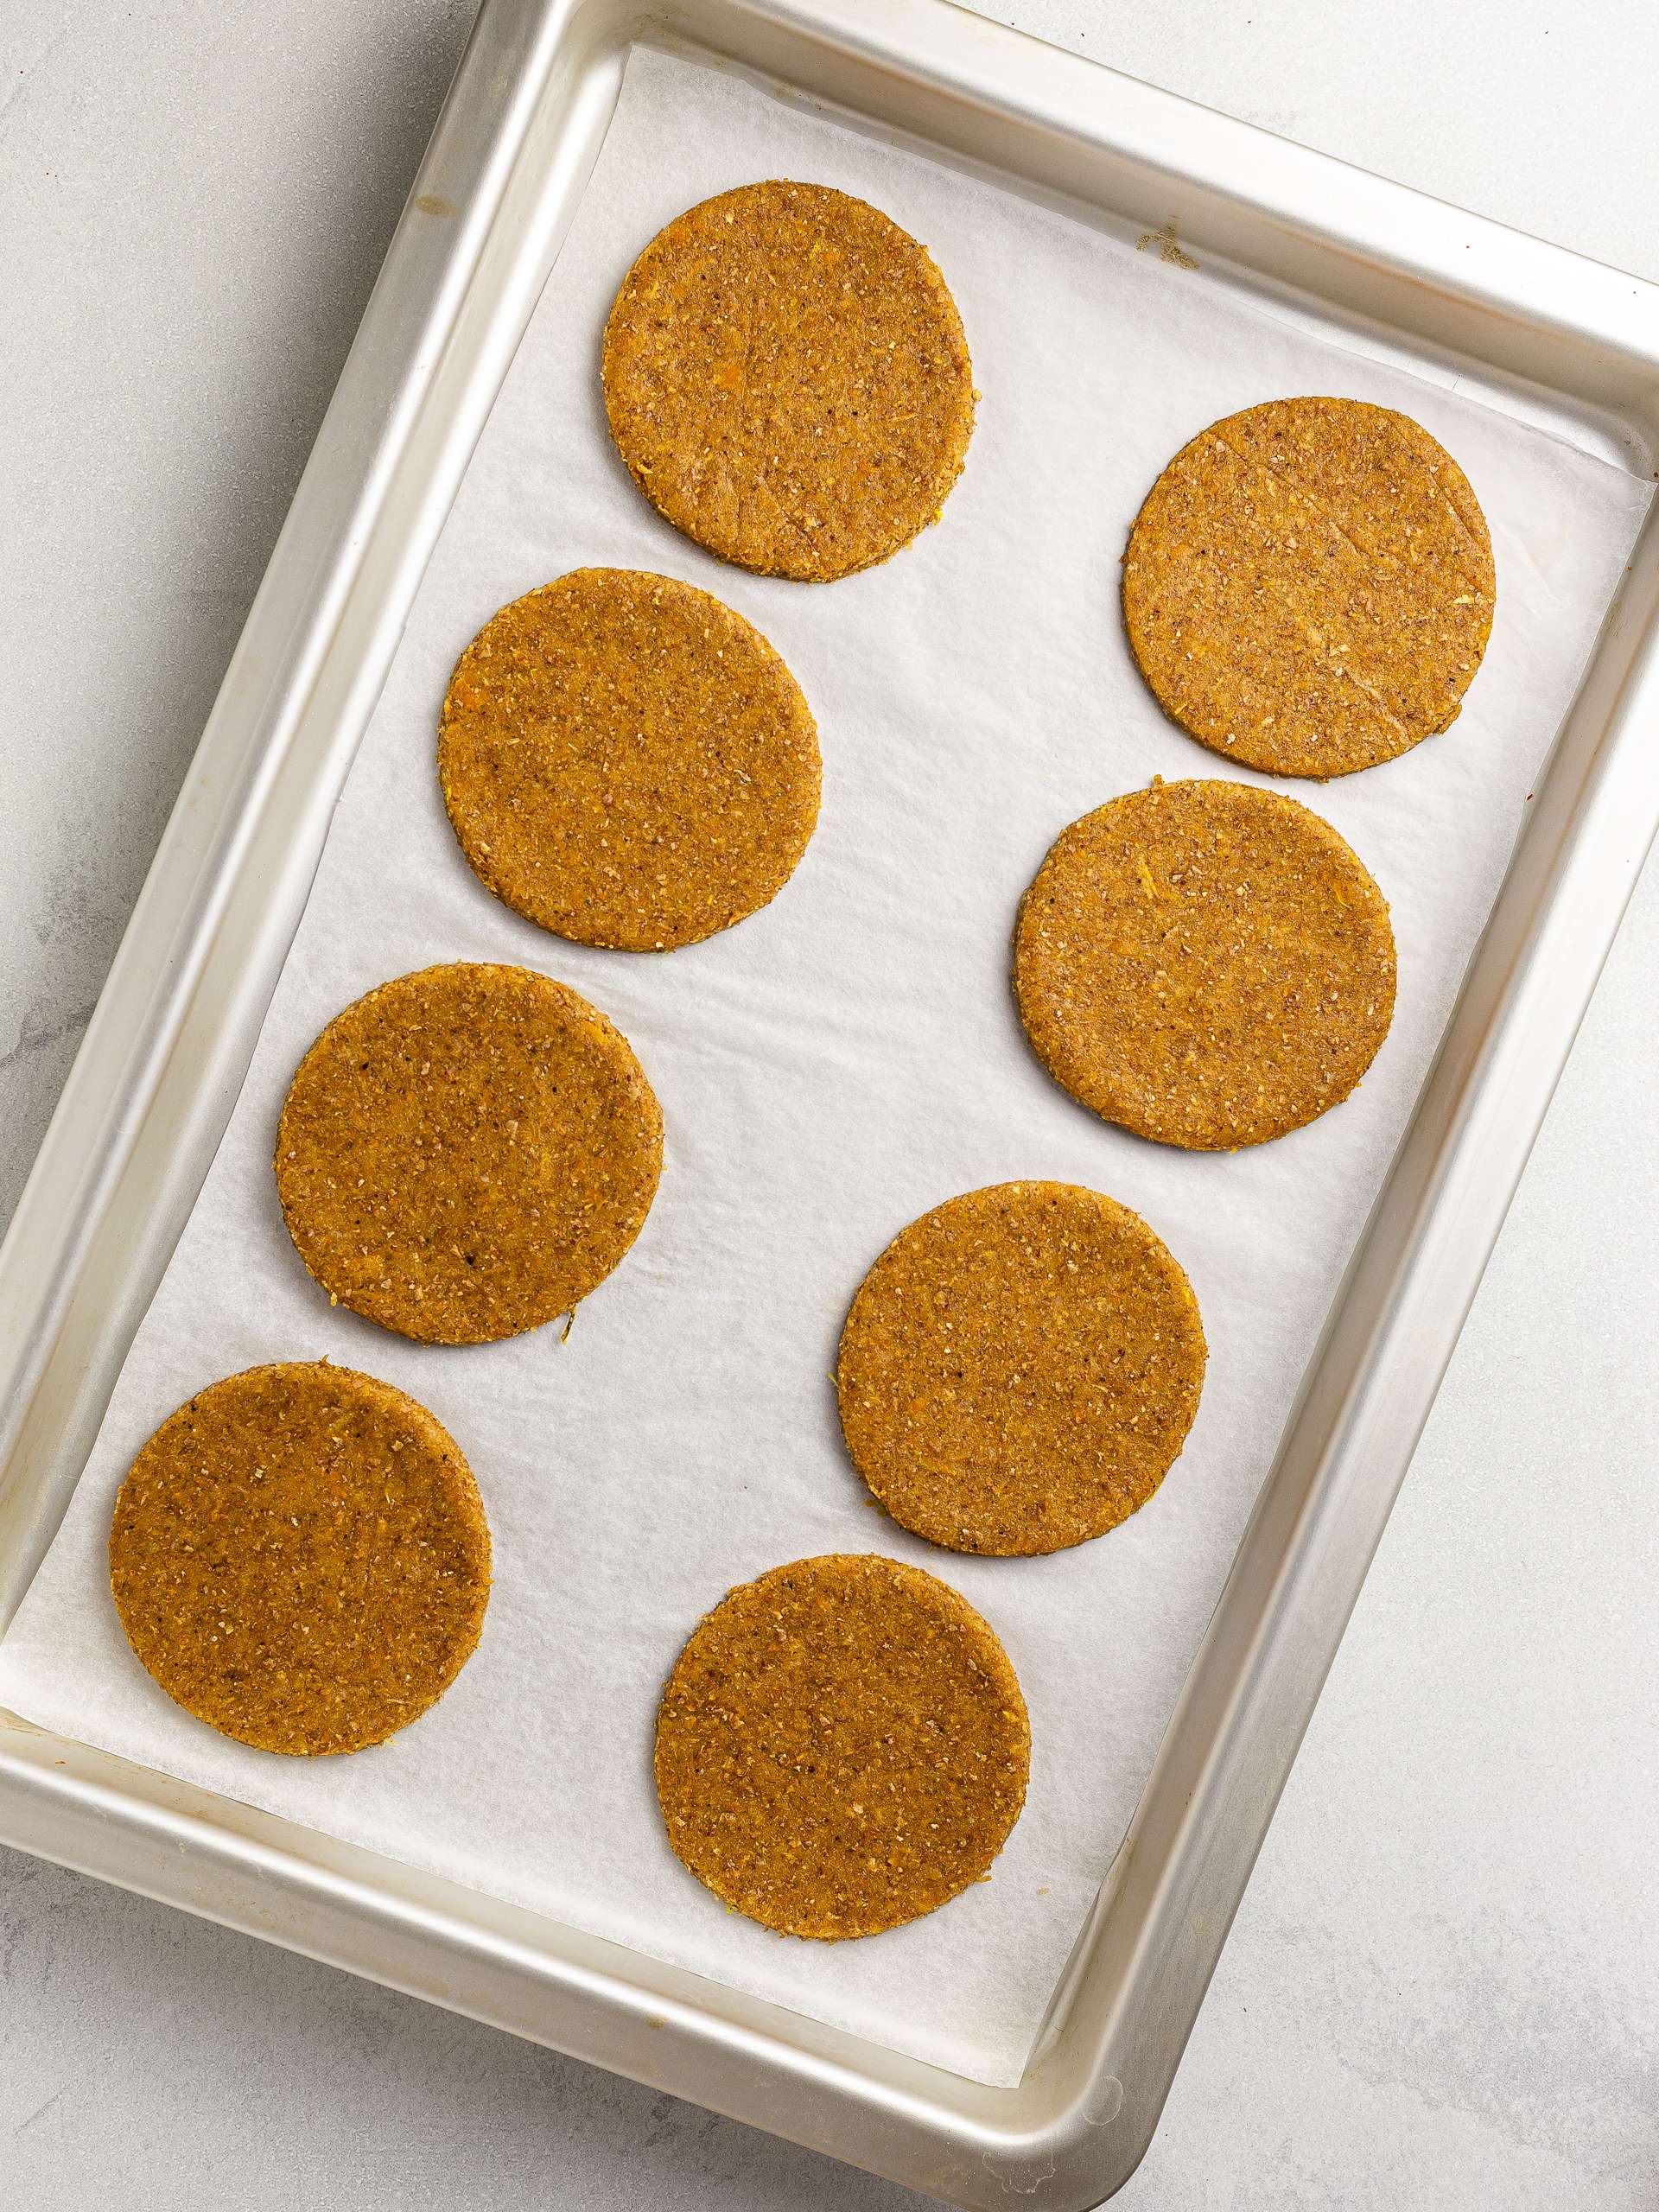 butternut squash cookies on a baking tray